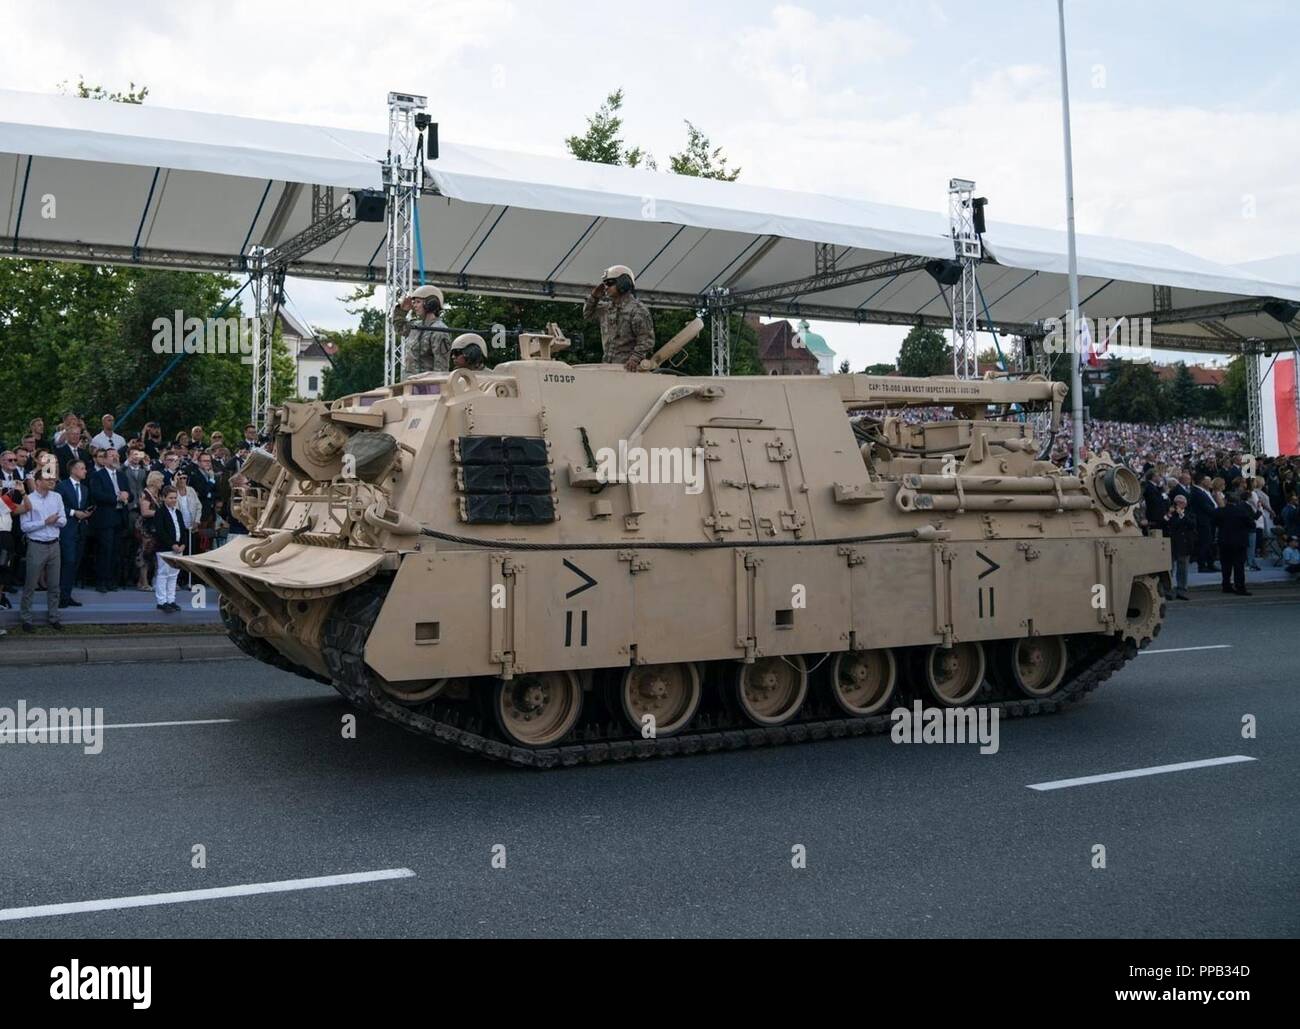 U.S. Soldiers from 1st Squadron, 7th Cavalry Regiment, 1st Armored Brigade Combat Team (1st ABCT) “Ironhorse,” 1st Cavalry Division drive an M88 Hercules heavy equipment recovery vehicle in the Polish Armed Forces Day Parade in Warsaw, Poland, Aug. 15, 2018. Over 40 Ironhorse brigade Soldiers and numerous vehicles participated in the parade. The 1st ABCT is deployed in support of Atlantic Resolve, an exercise committed to peace, security and stability in Europe. Stock Photo